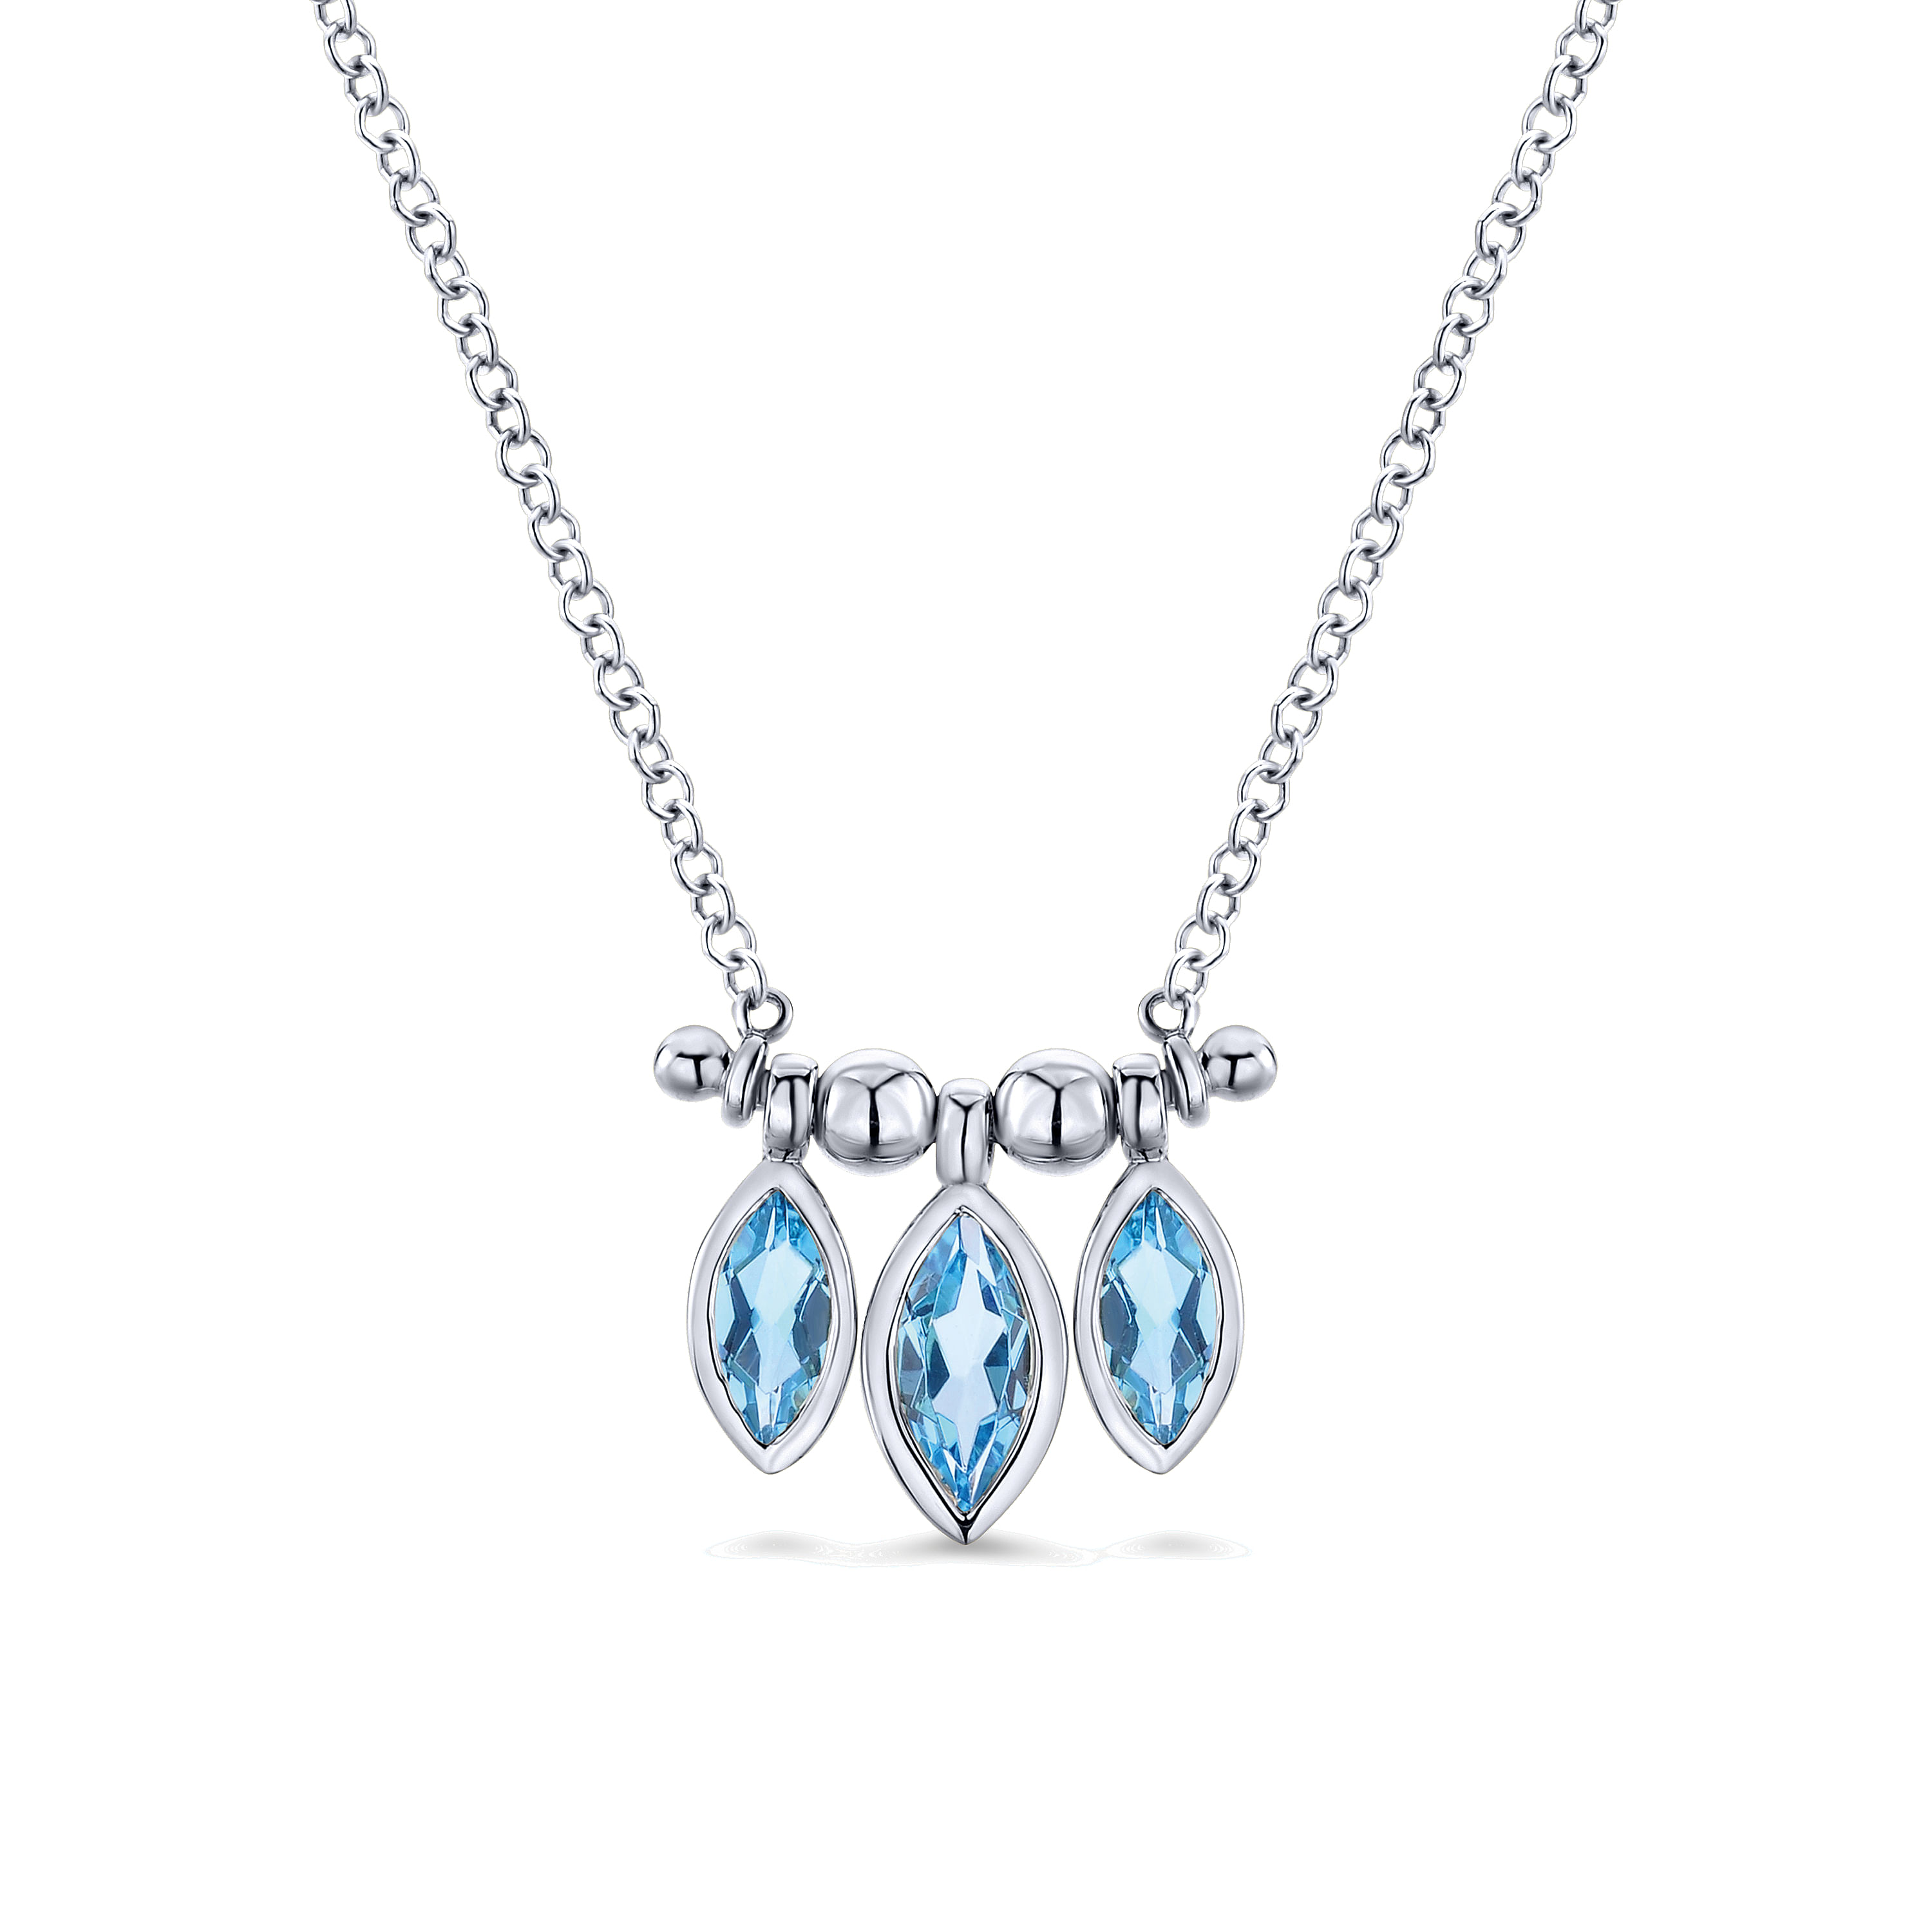 14k White Gold Marquise Cut Swiss Blue Topaz Curved Bar Necklace